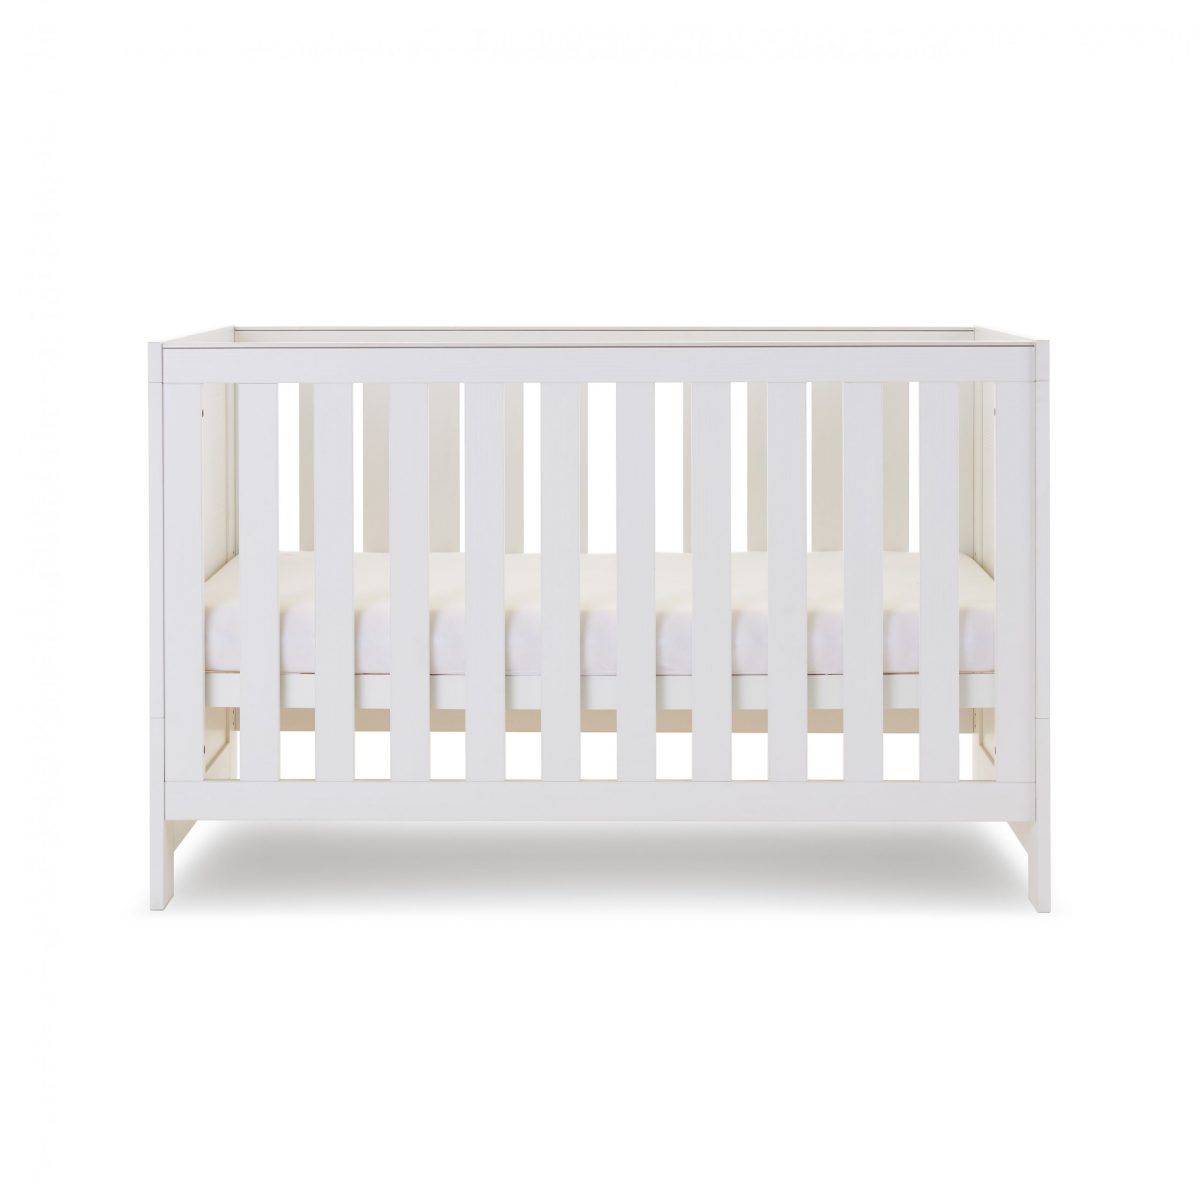 Obaby Nika 2 Piece Room Set - White Wash -  | For Your Little One